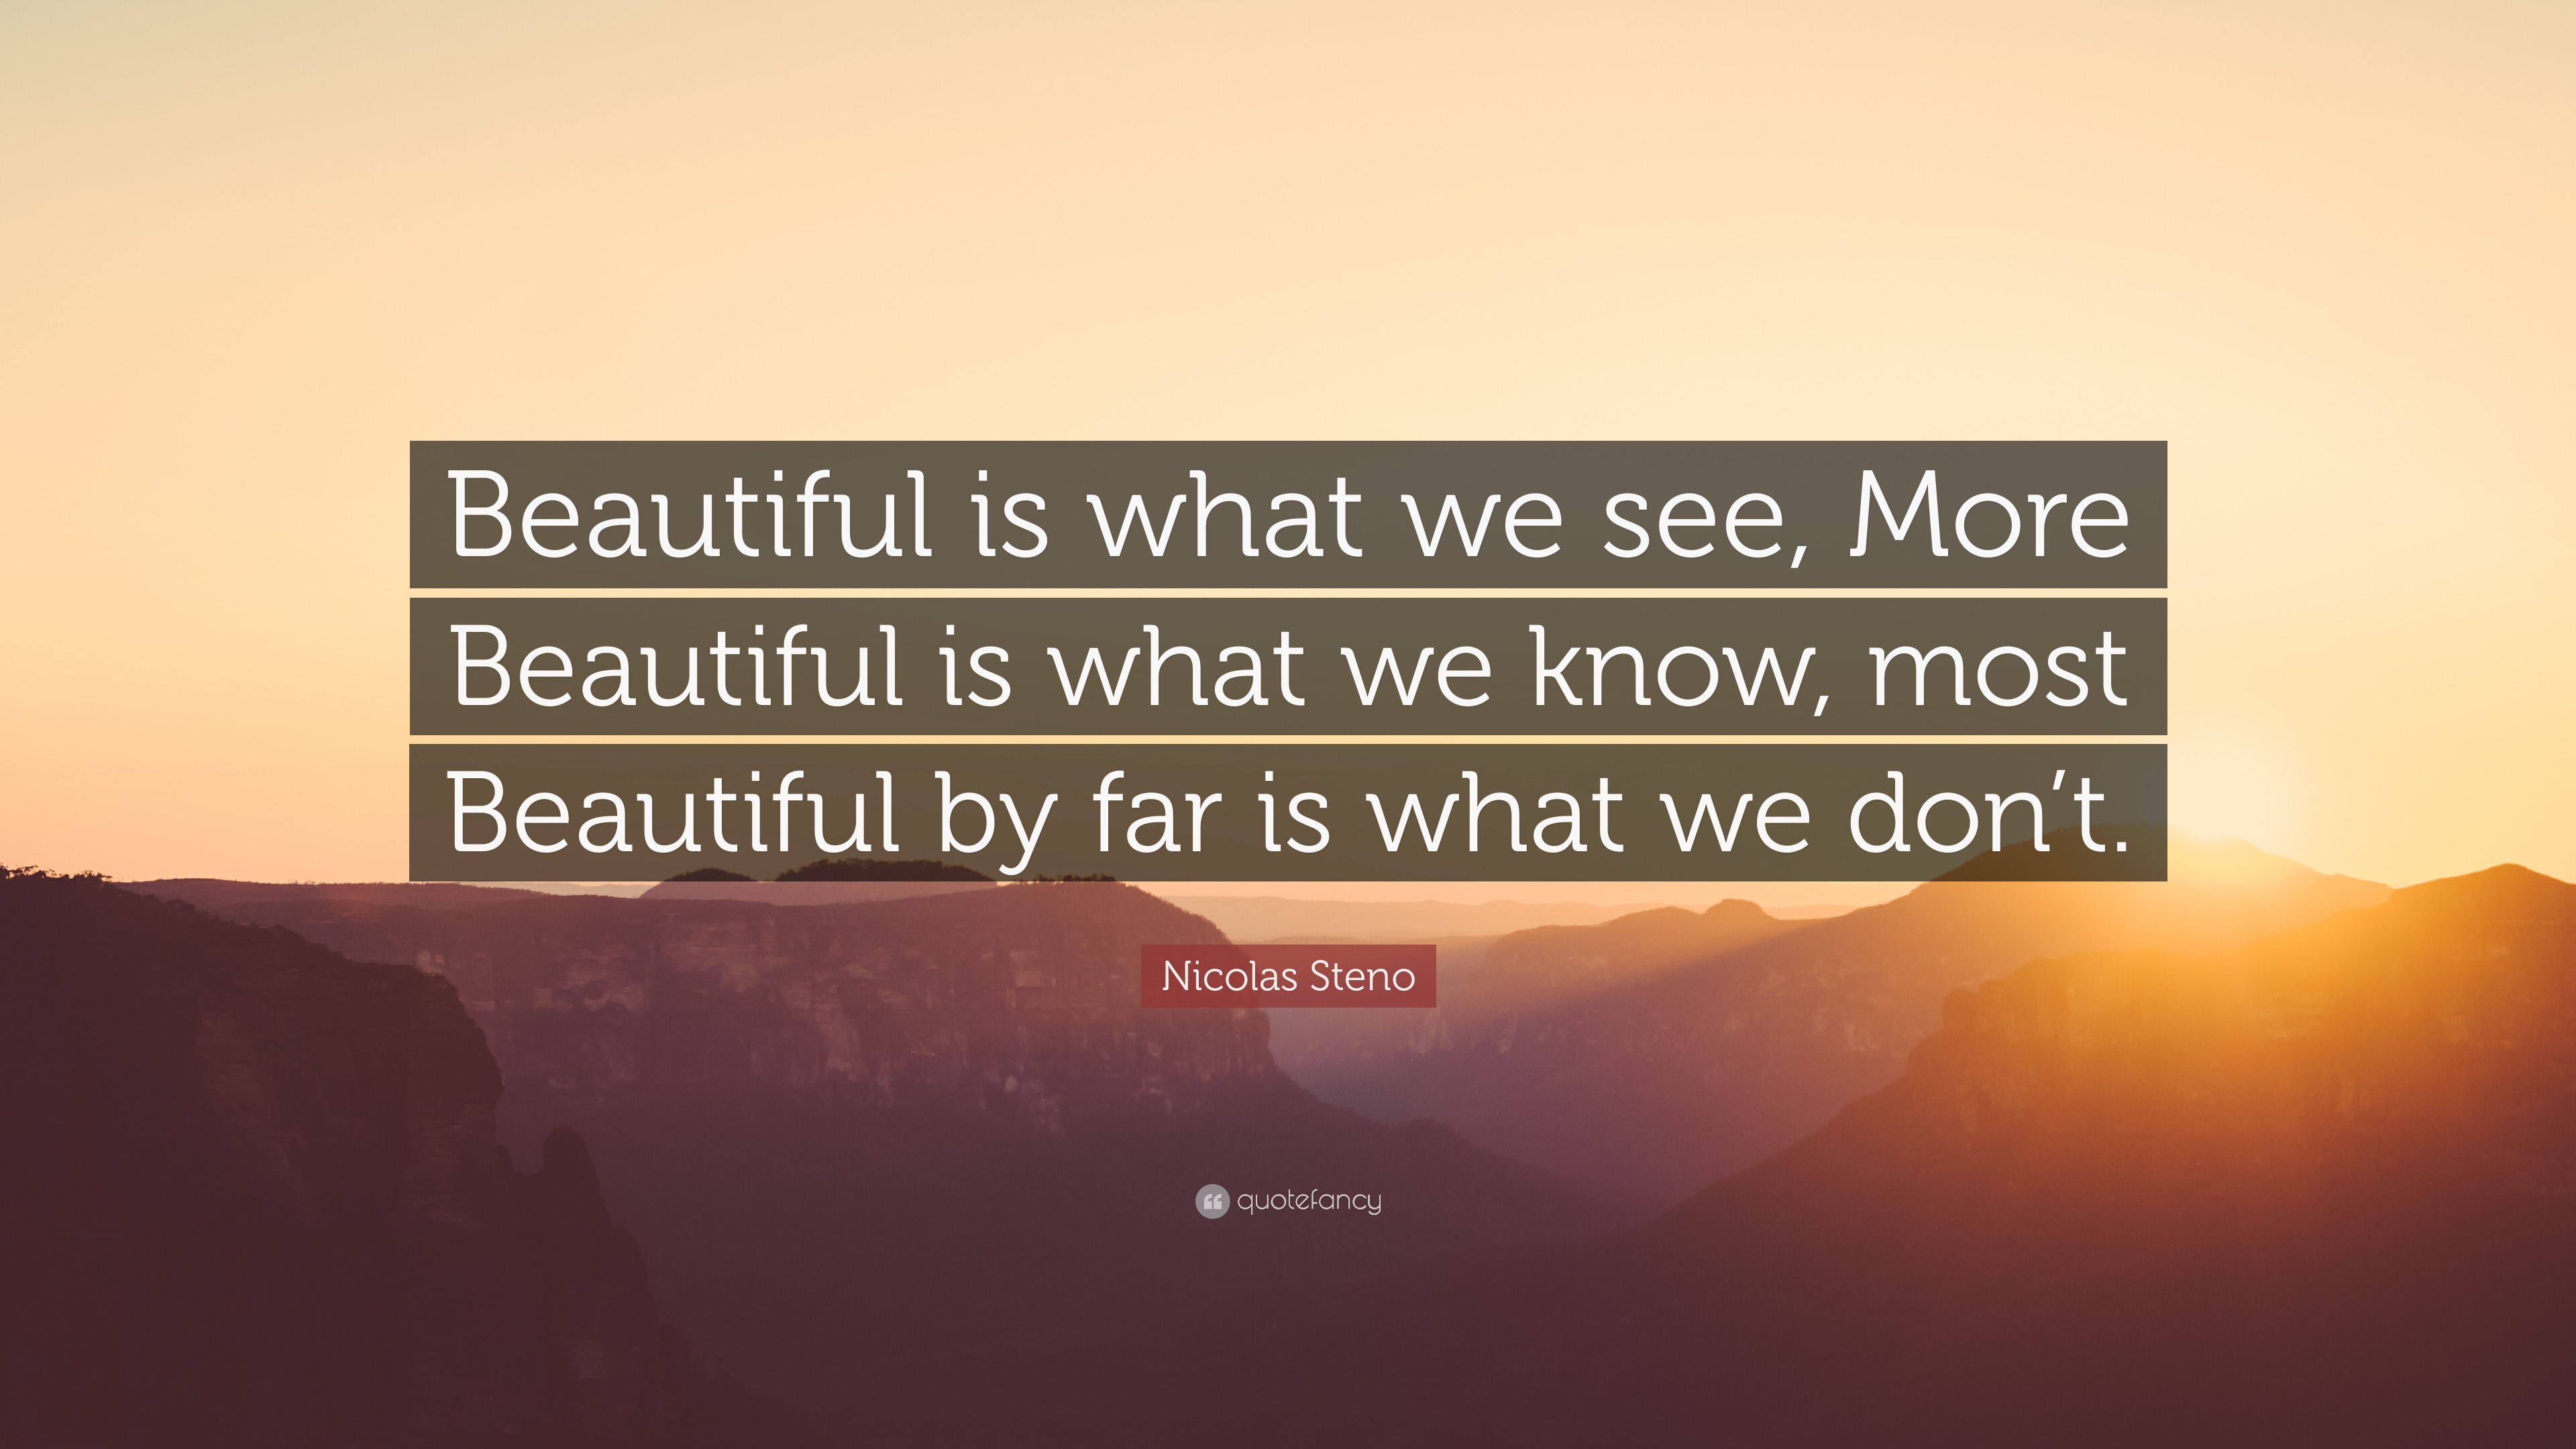 Nicolas Steno Quote: “Beautiful is what we see, More Beautiful is what ...